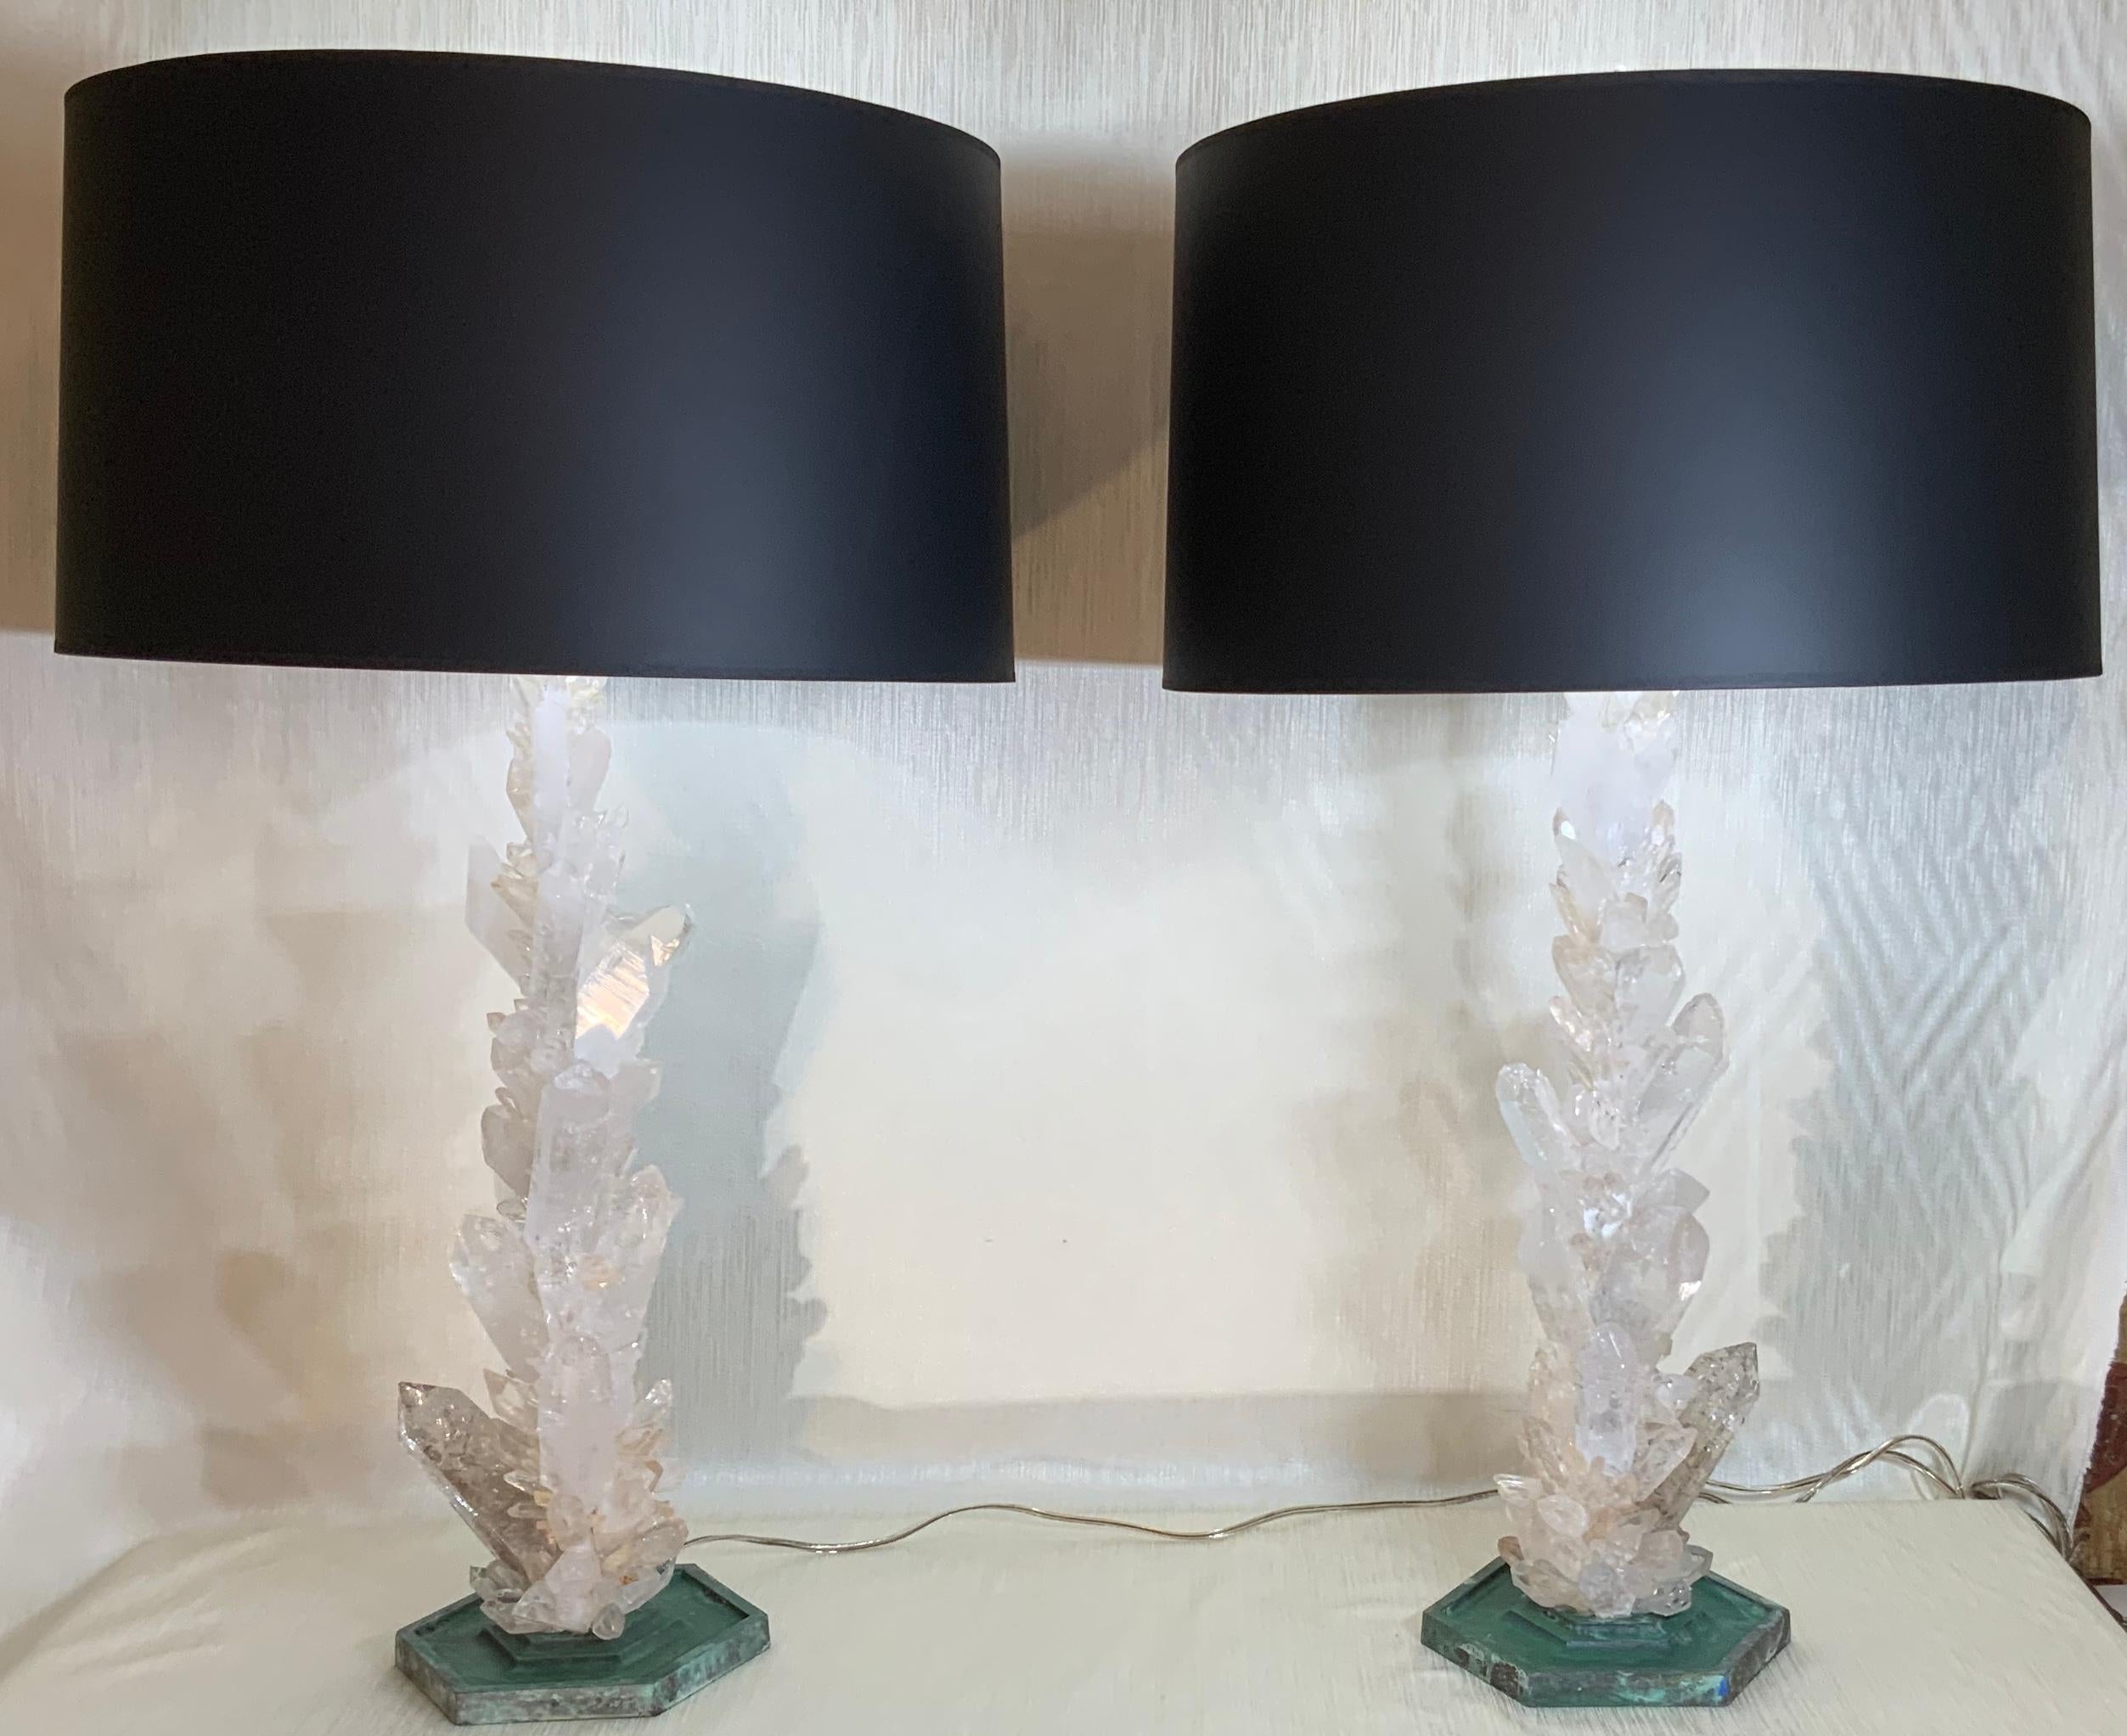 Elegant pair of table lamps made of hand selected large and smaller genuine White color rock quartz crystal pieces, artistically put together to make beautiful and impressive pair of table lamps.
19th century bronze base size: 8” x 8” x